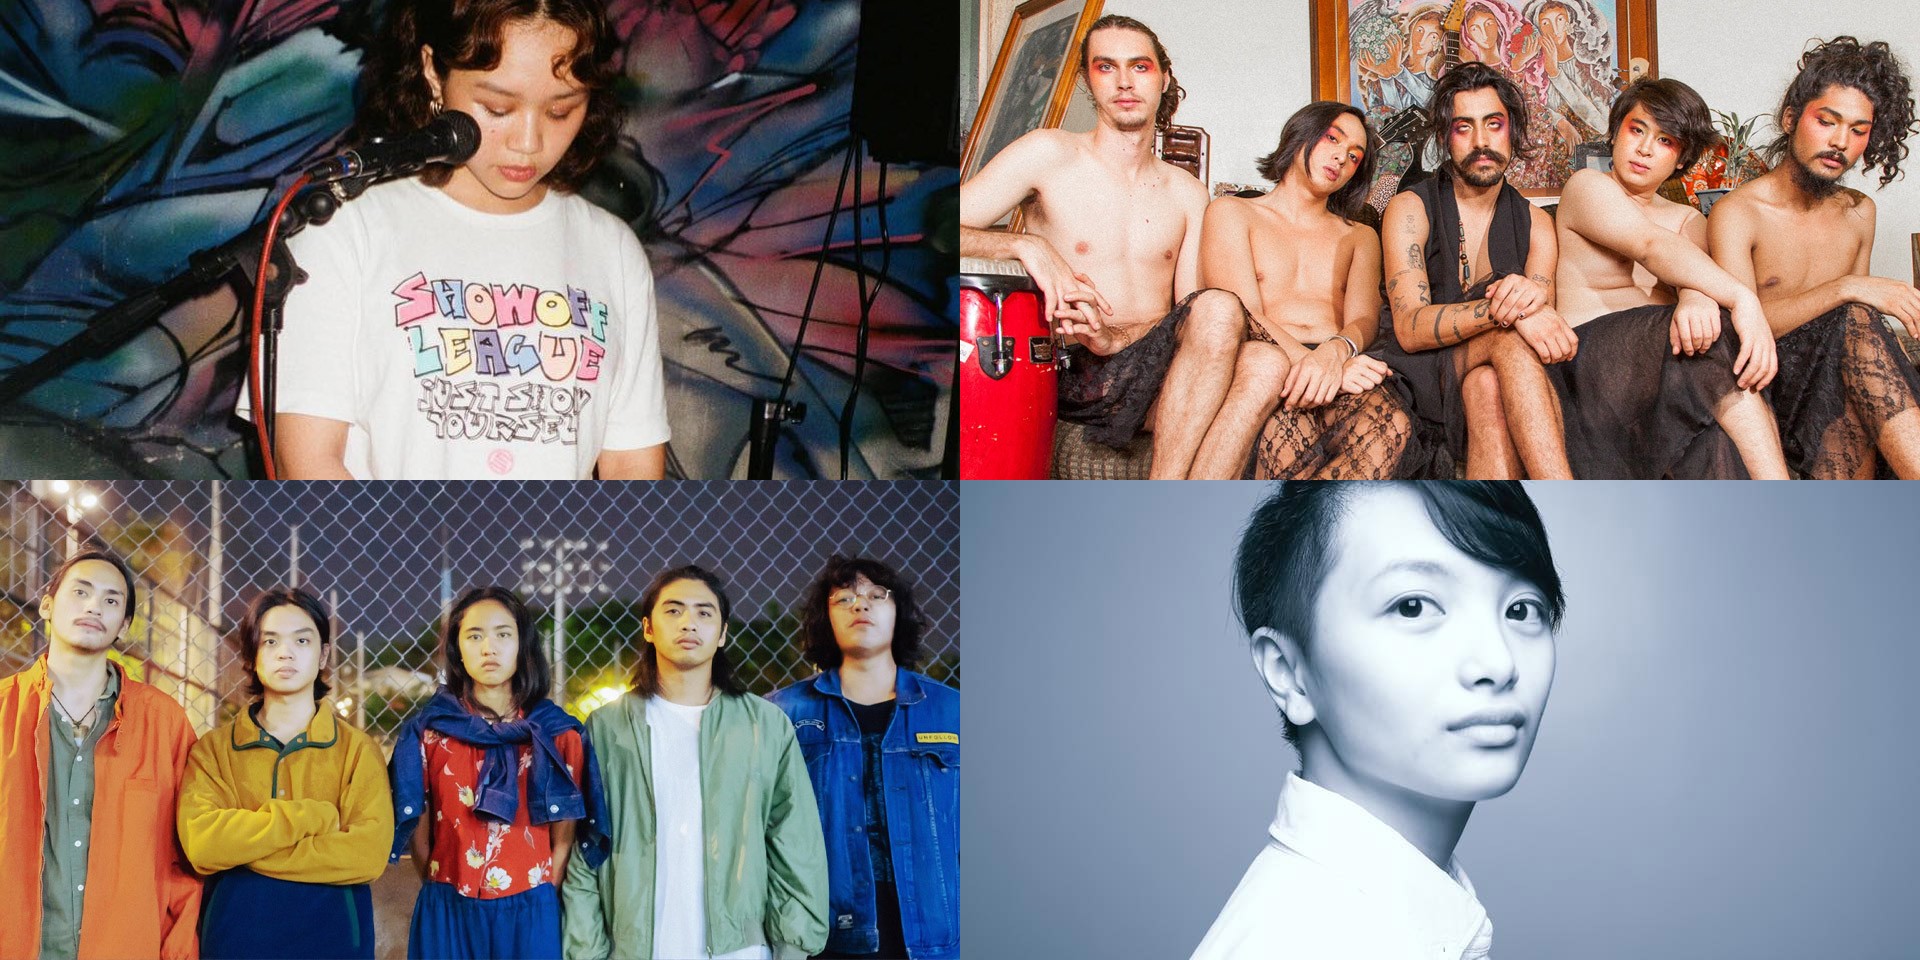 Grrl Cloud, La Crema, Carousel Casualties, TheSunManager, and more release new music – listen